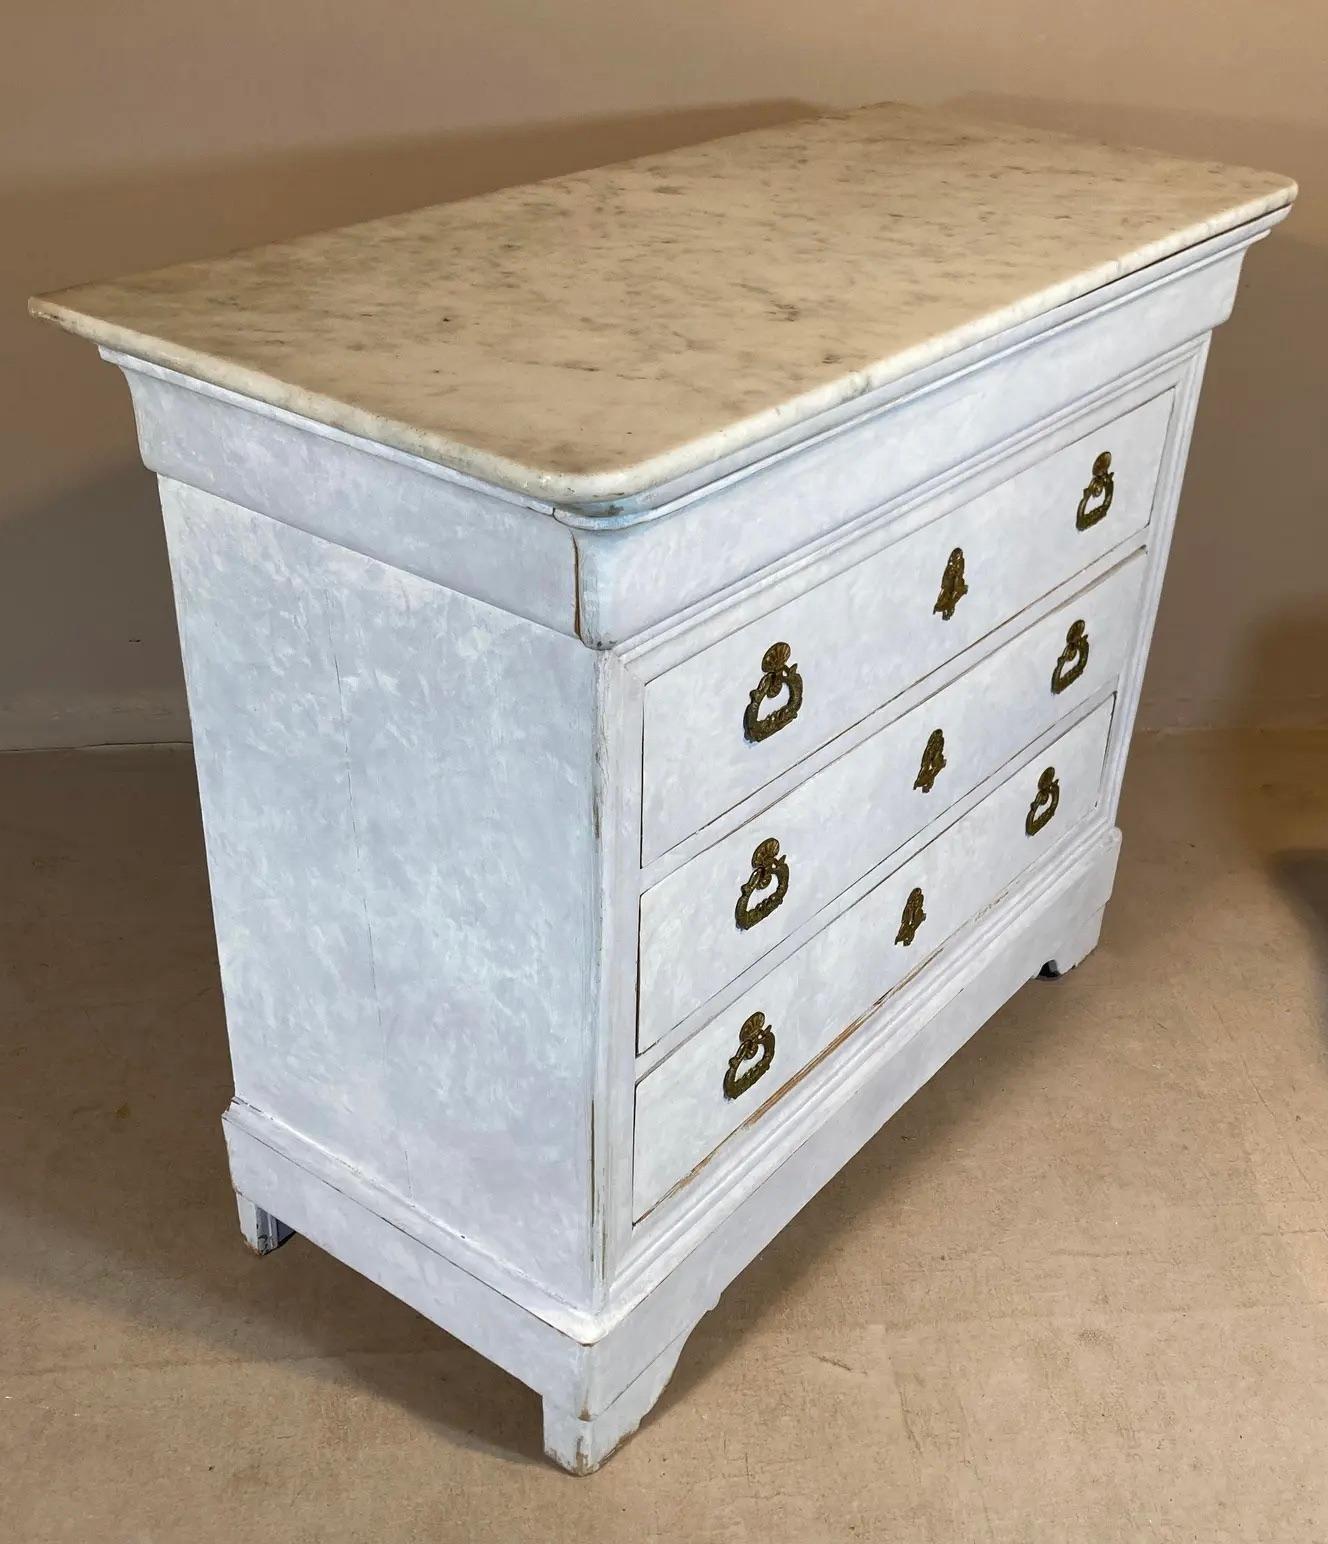 A period Italian commode in the Louis Philippe manner, from about 1830, with its original marble top. The custom painted finish, with its scumbled Swedishy effect, makes for a nice change - it lightens the look. The wonderfully detailed gilded